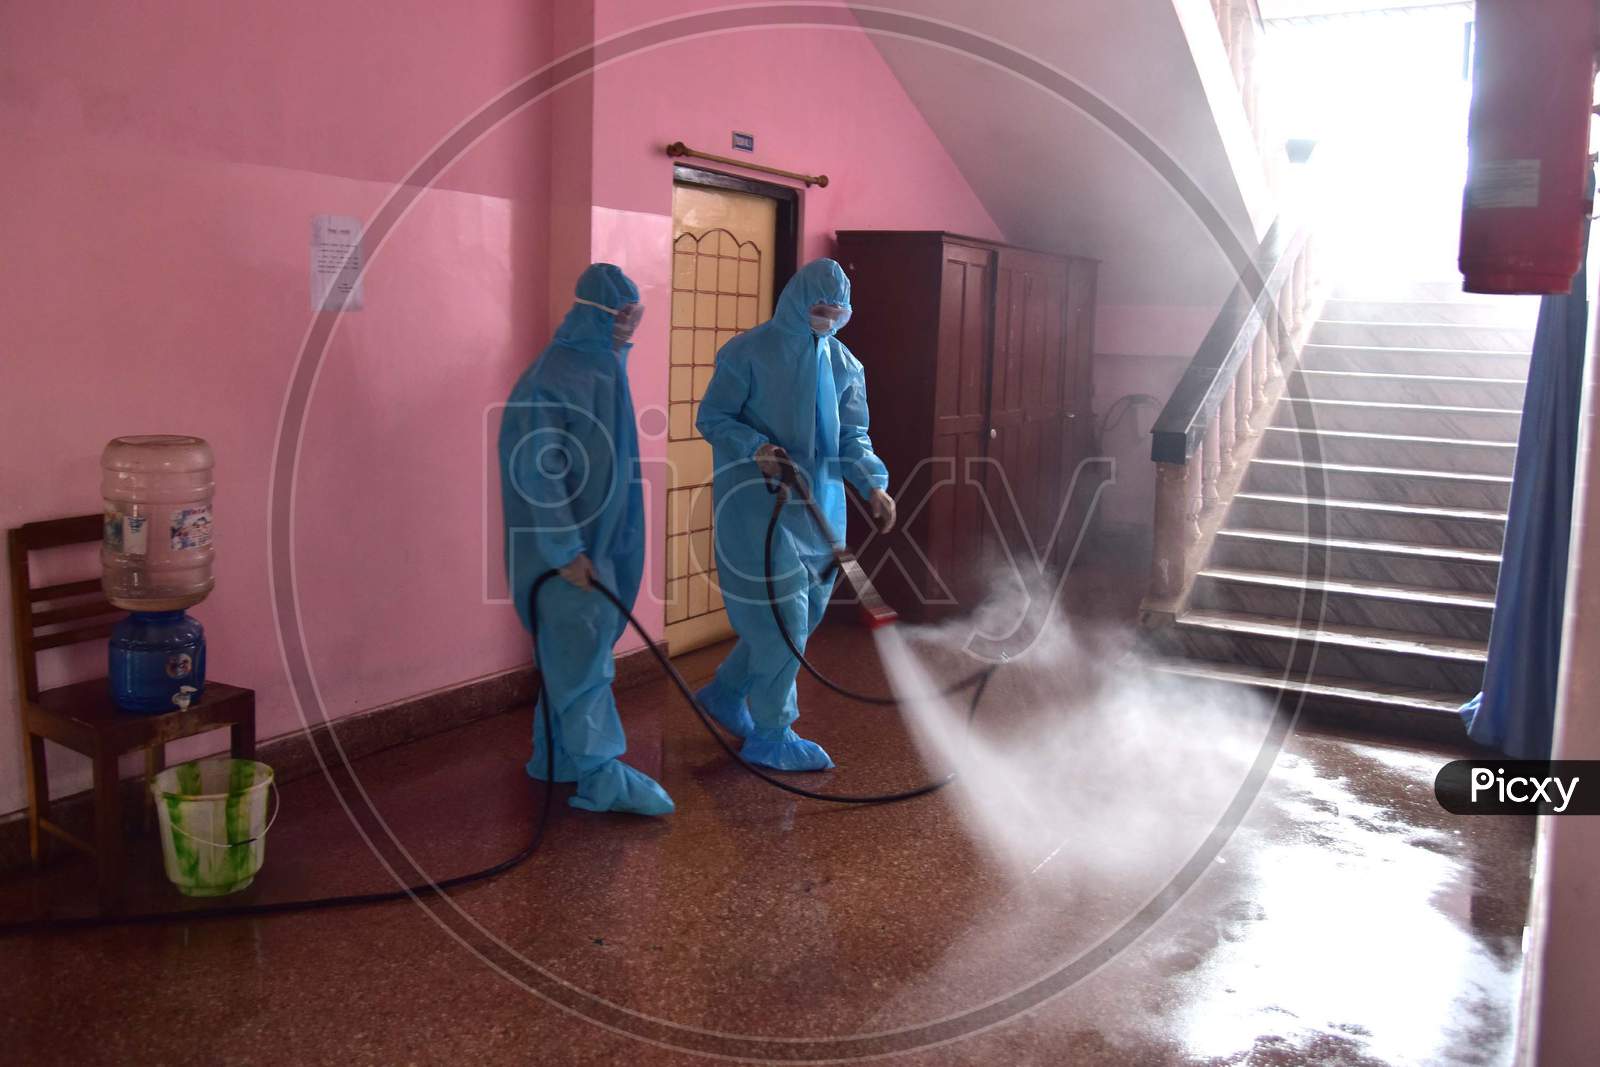 Firefighters wearing hazmat suits spray disinfectant in judicial courts after reports of five staff members who tested positive for Coronavirus in Nagaon, Assam on July 03, 2020.